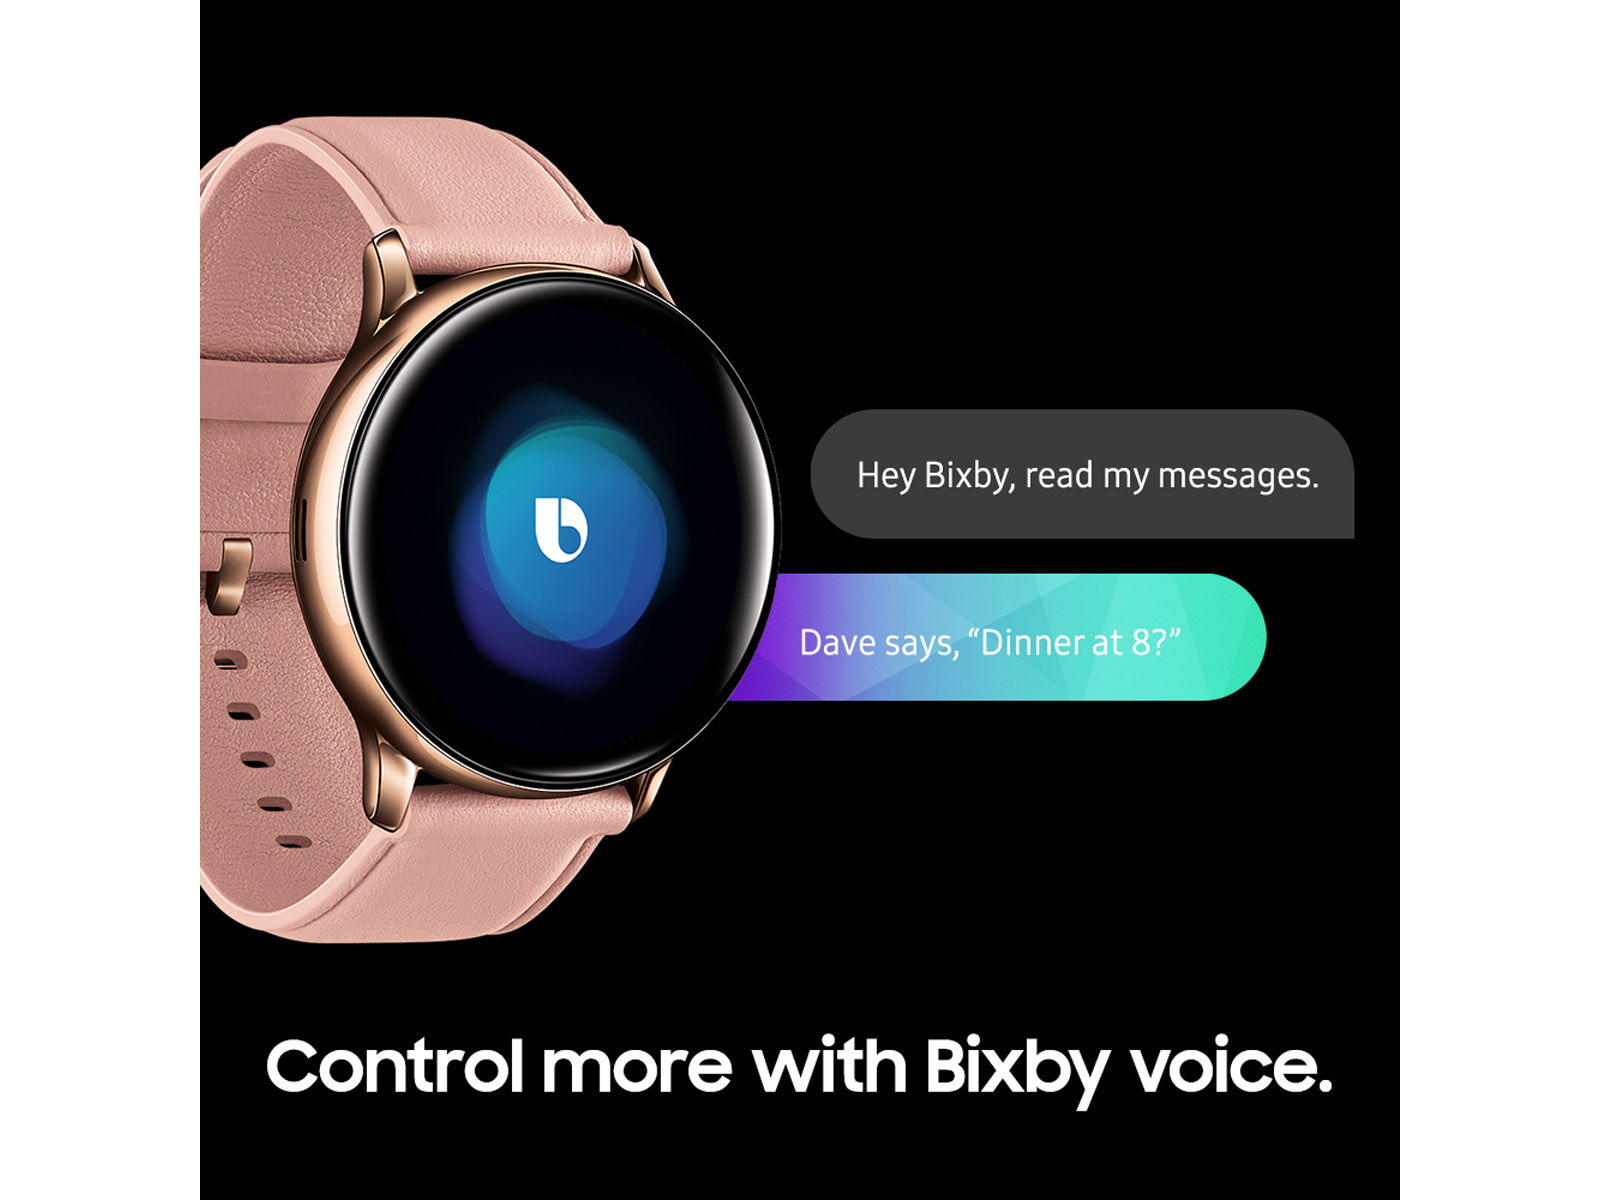 Galaxy Watch Active2 (40mm), Pink Gold (Bluetooth) Wearables -  SM-R830NZDAXAR